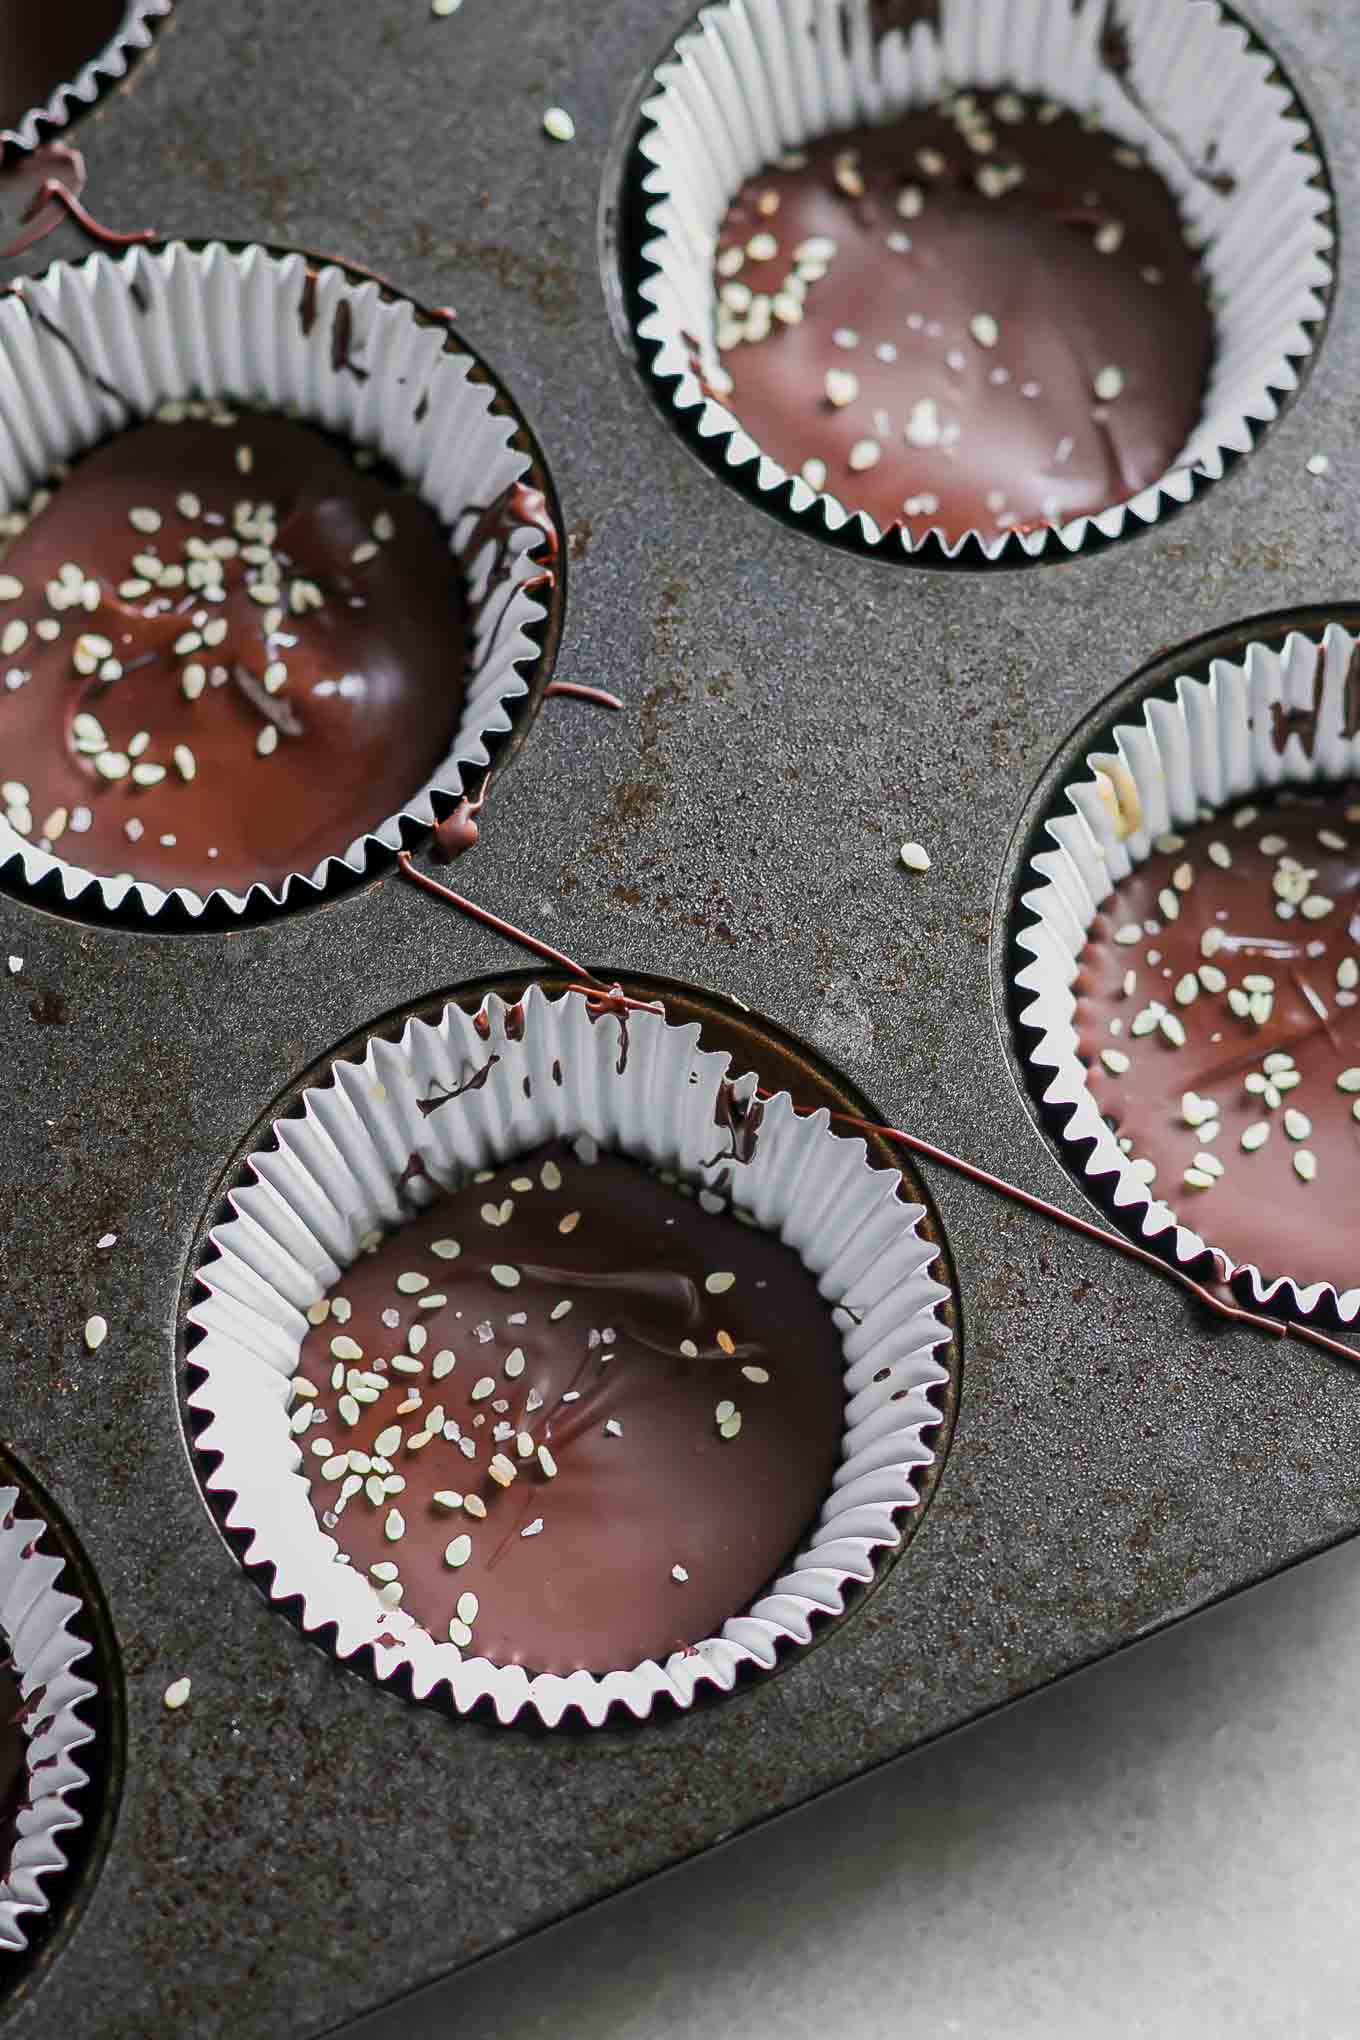 homemade chocolate cups garnished with sesame seeds inside a muffin liner